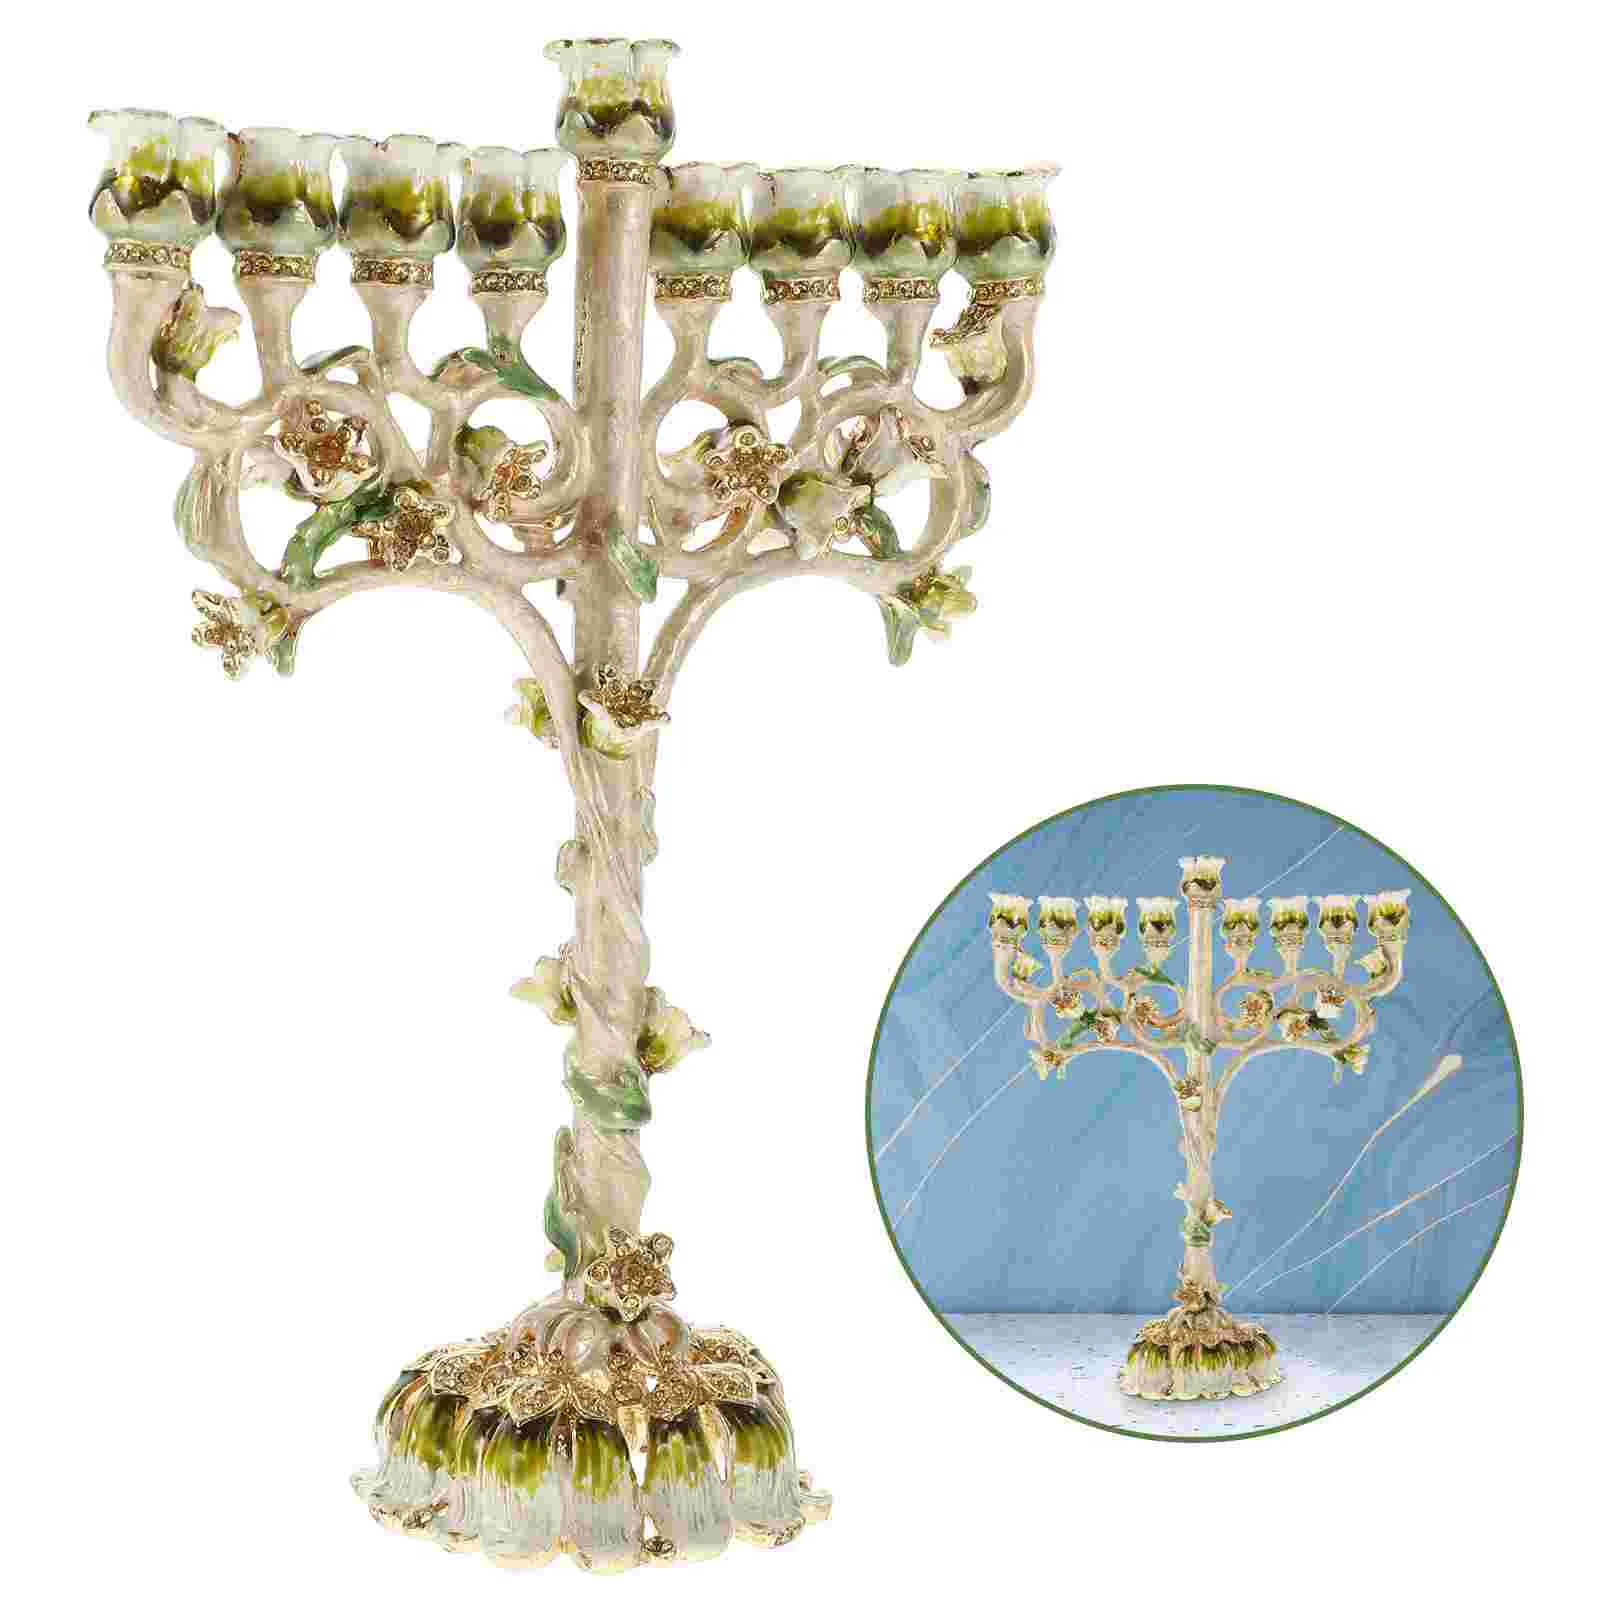 

Ornaments Modern Candles Stand Retro Holder Metal Candlestick Tabletop Room Alloy Wedding Base Stands